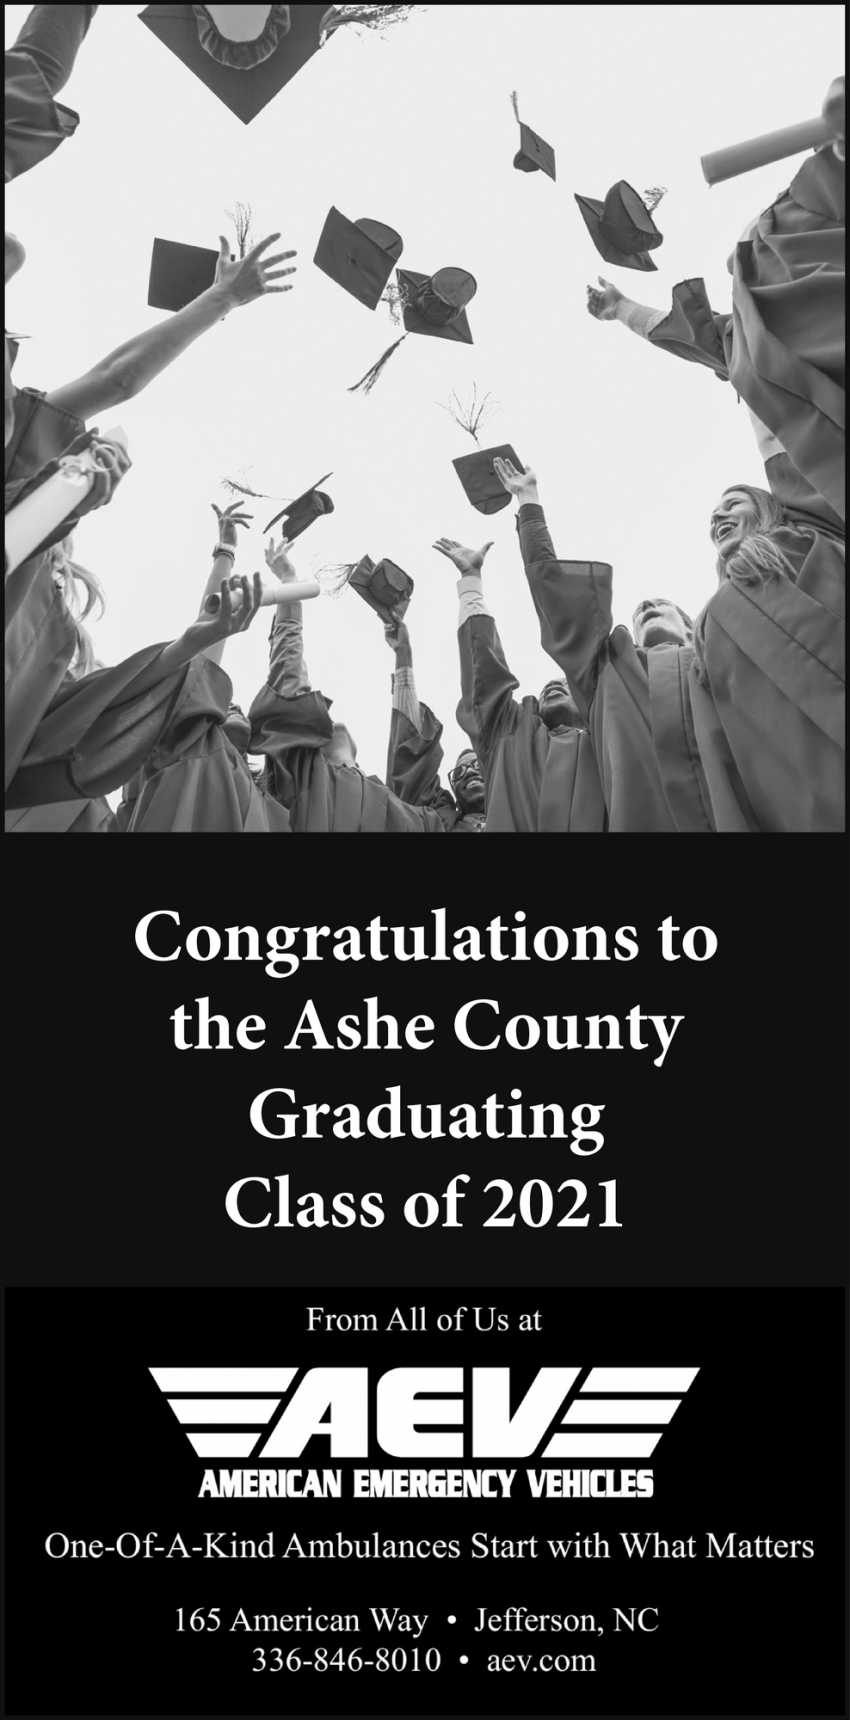 Congratulations To The Ashe County Graduating Class of 2021